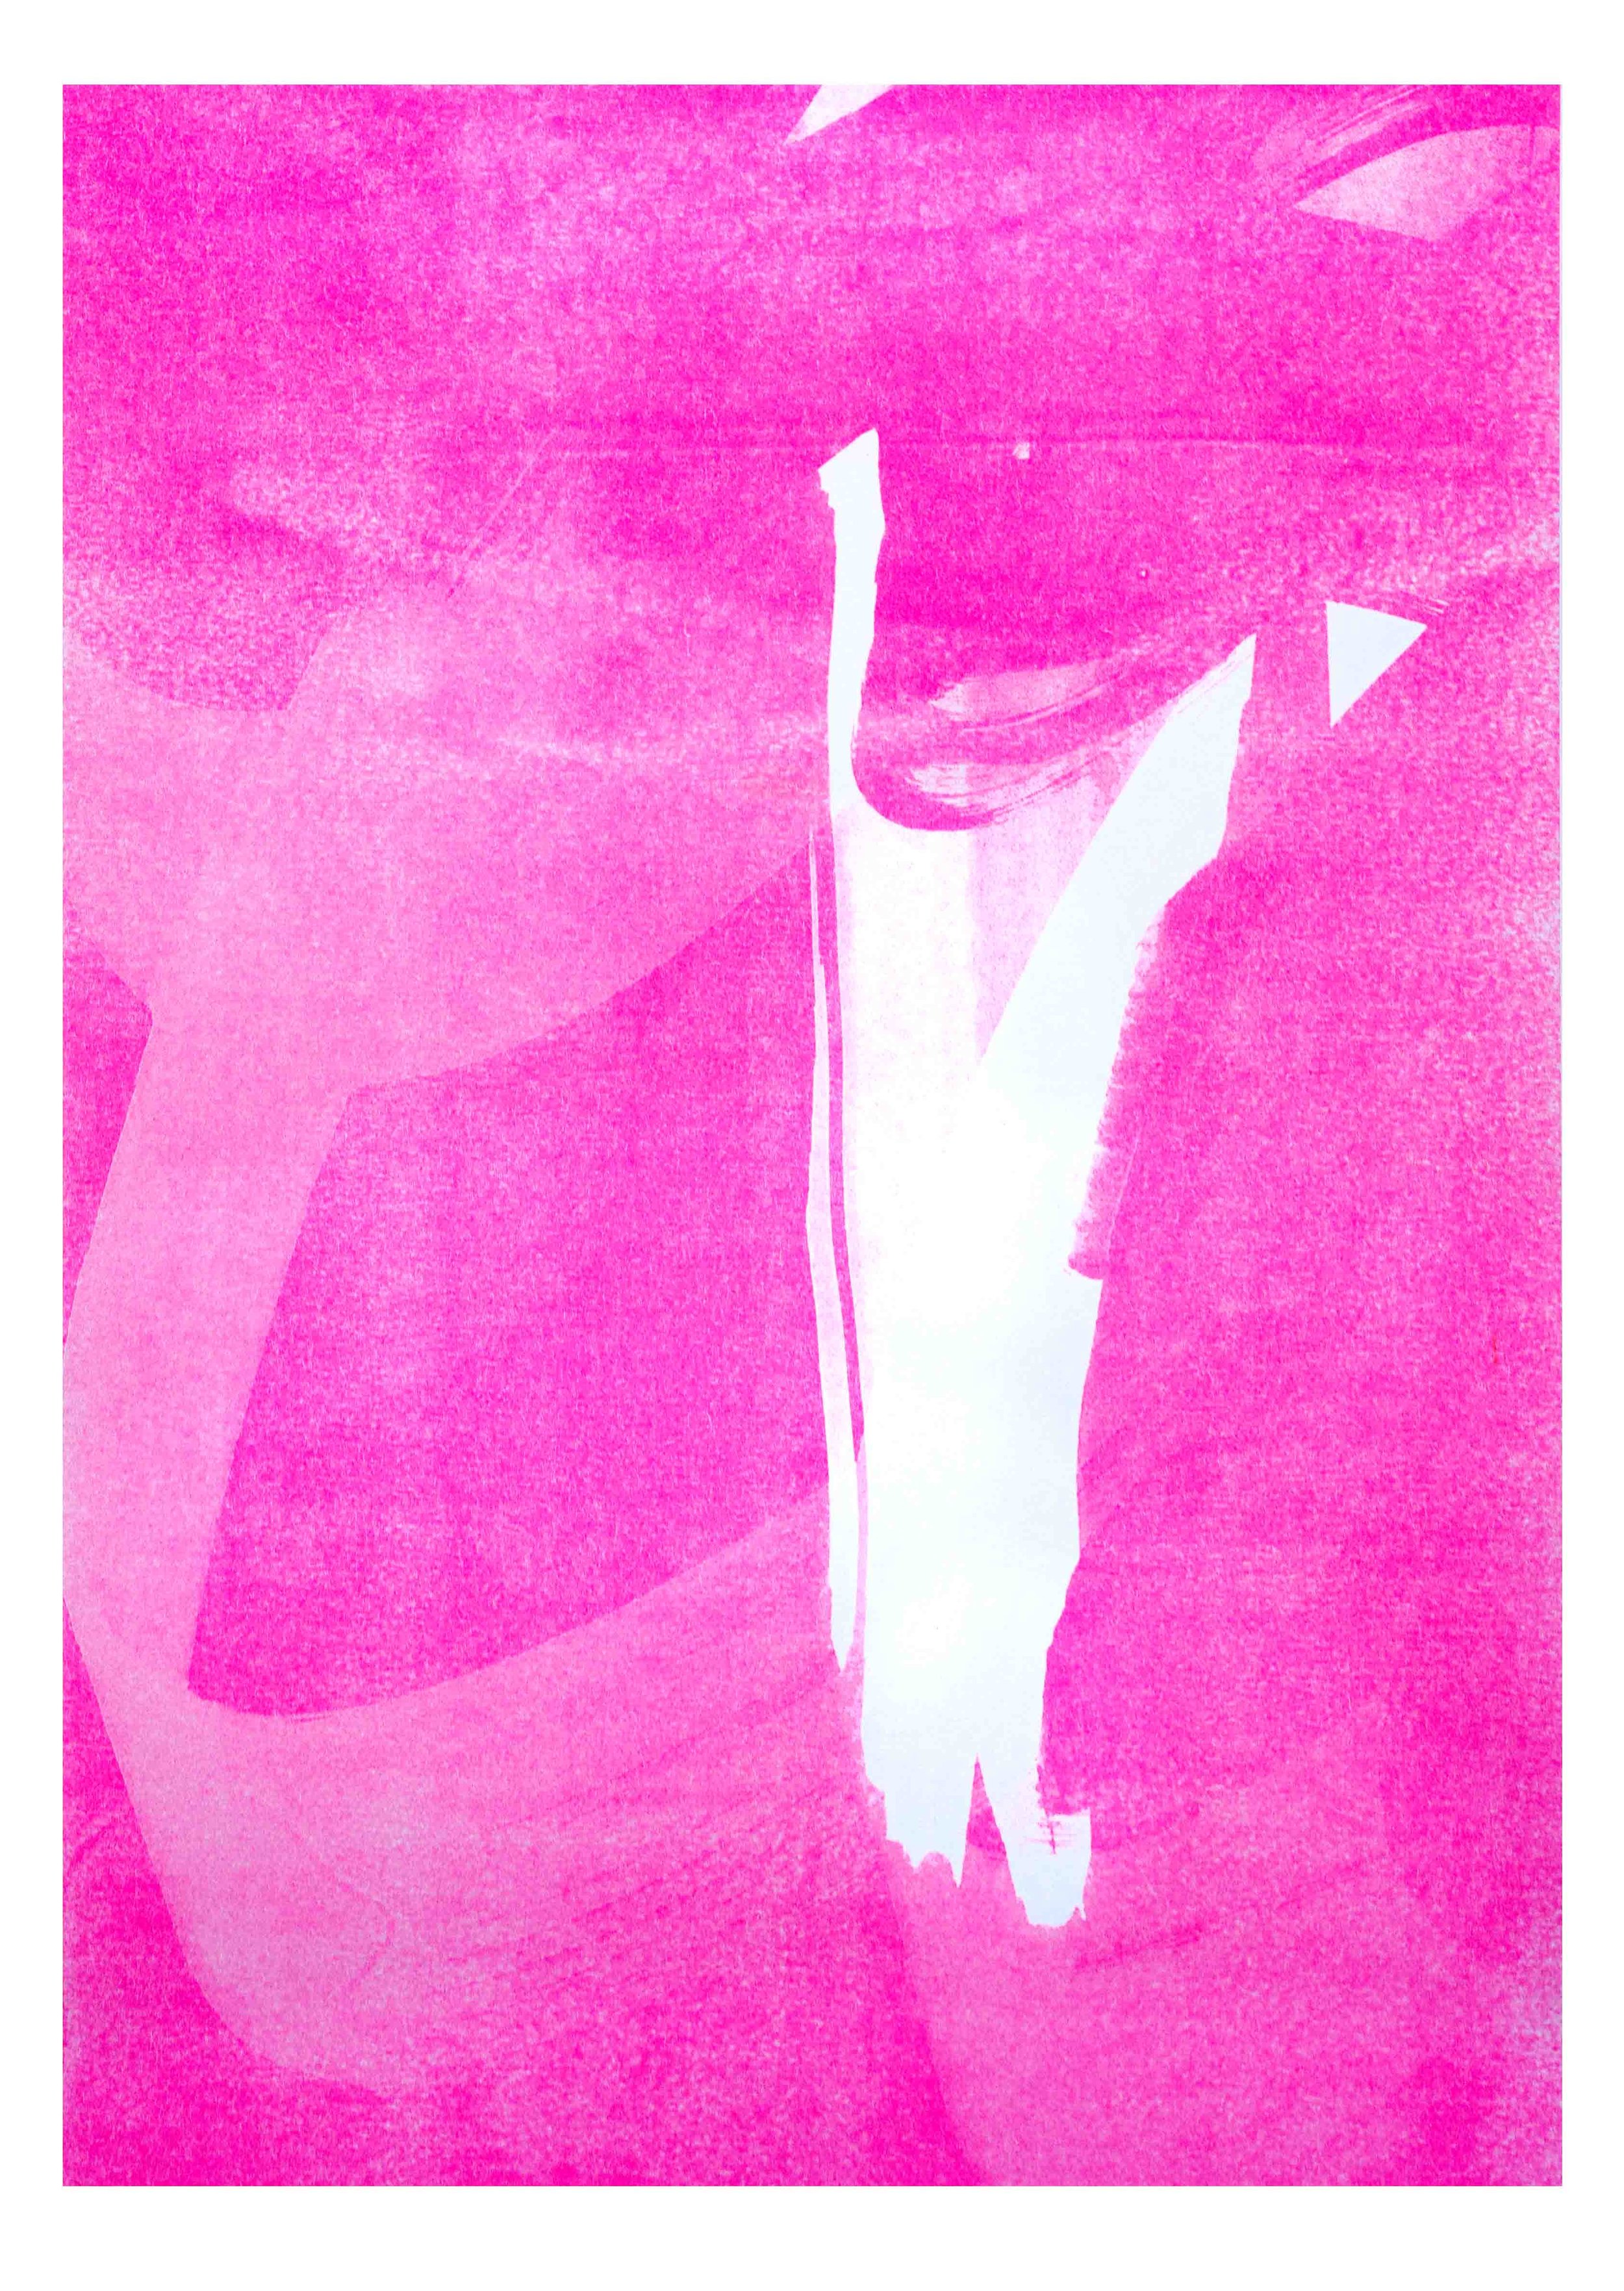  Untitled, 2023 risograph print on paper 42,0 x 29,7 cm (9-23) 